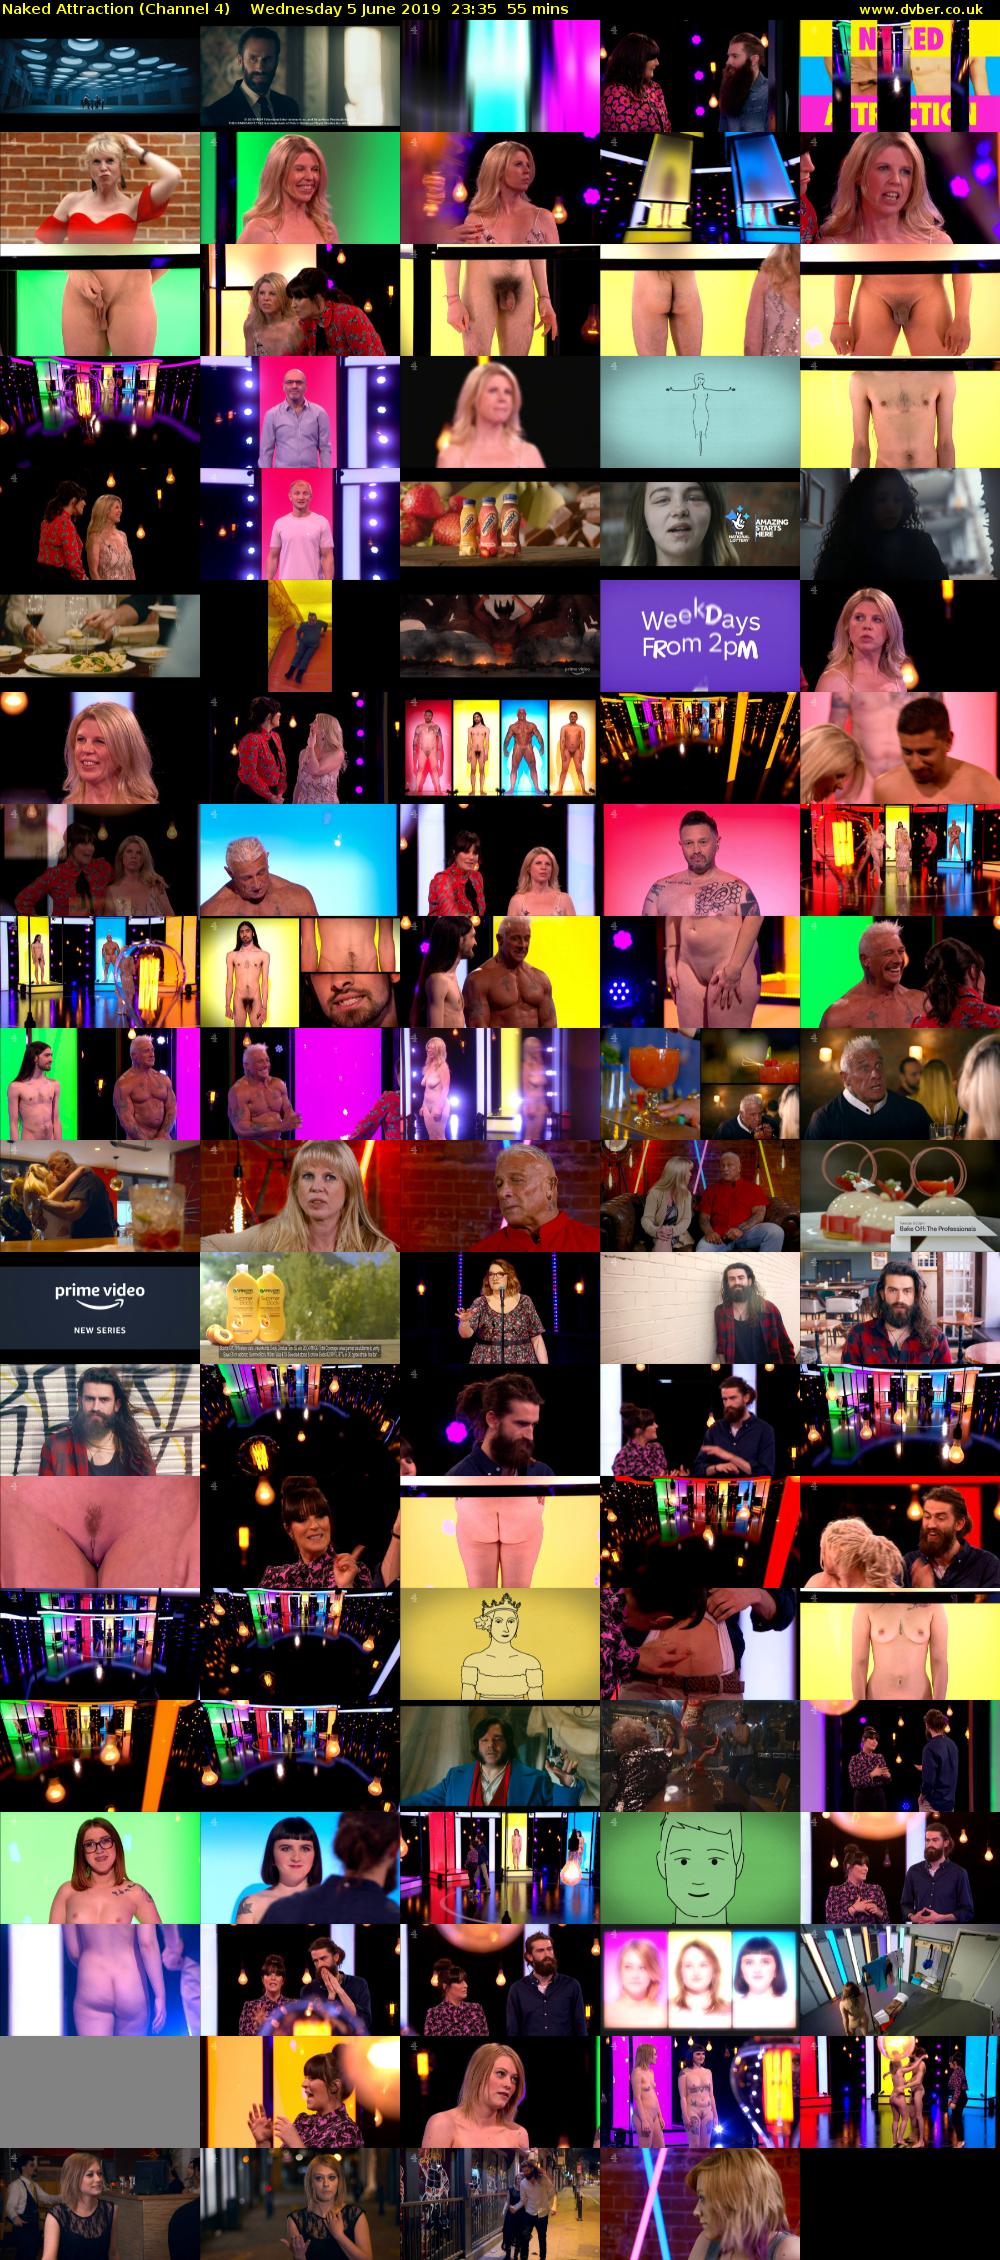 Naked Attraction (Channel 4) Wednesday 5 June 2019 23:35 - 00:30